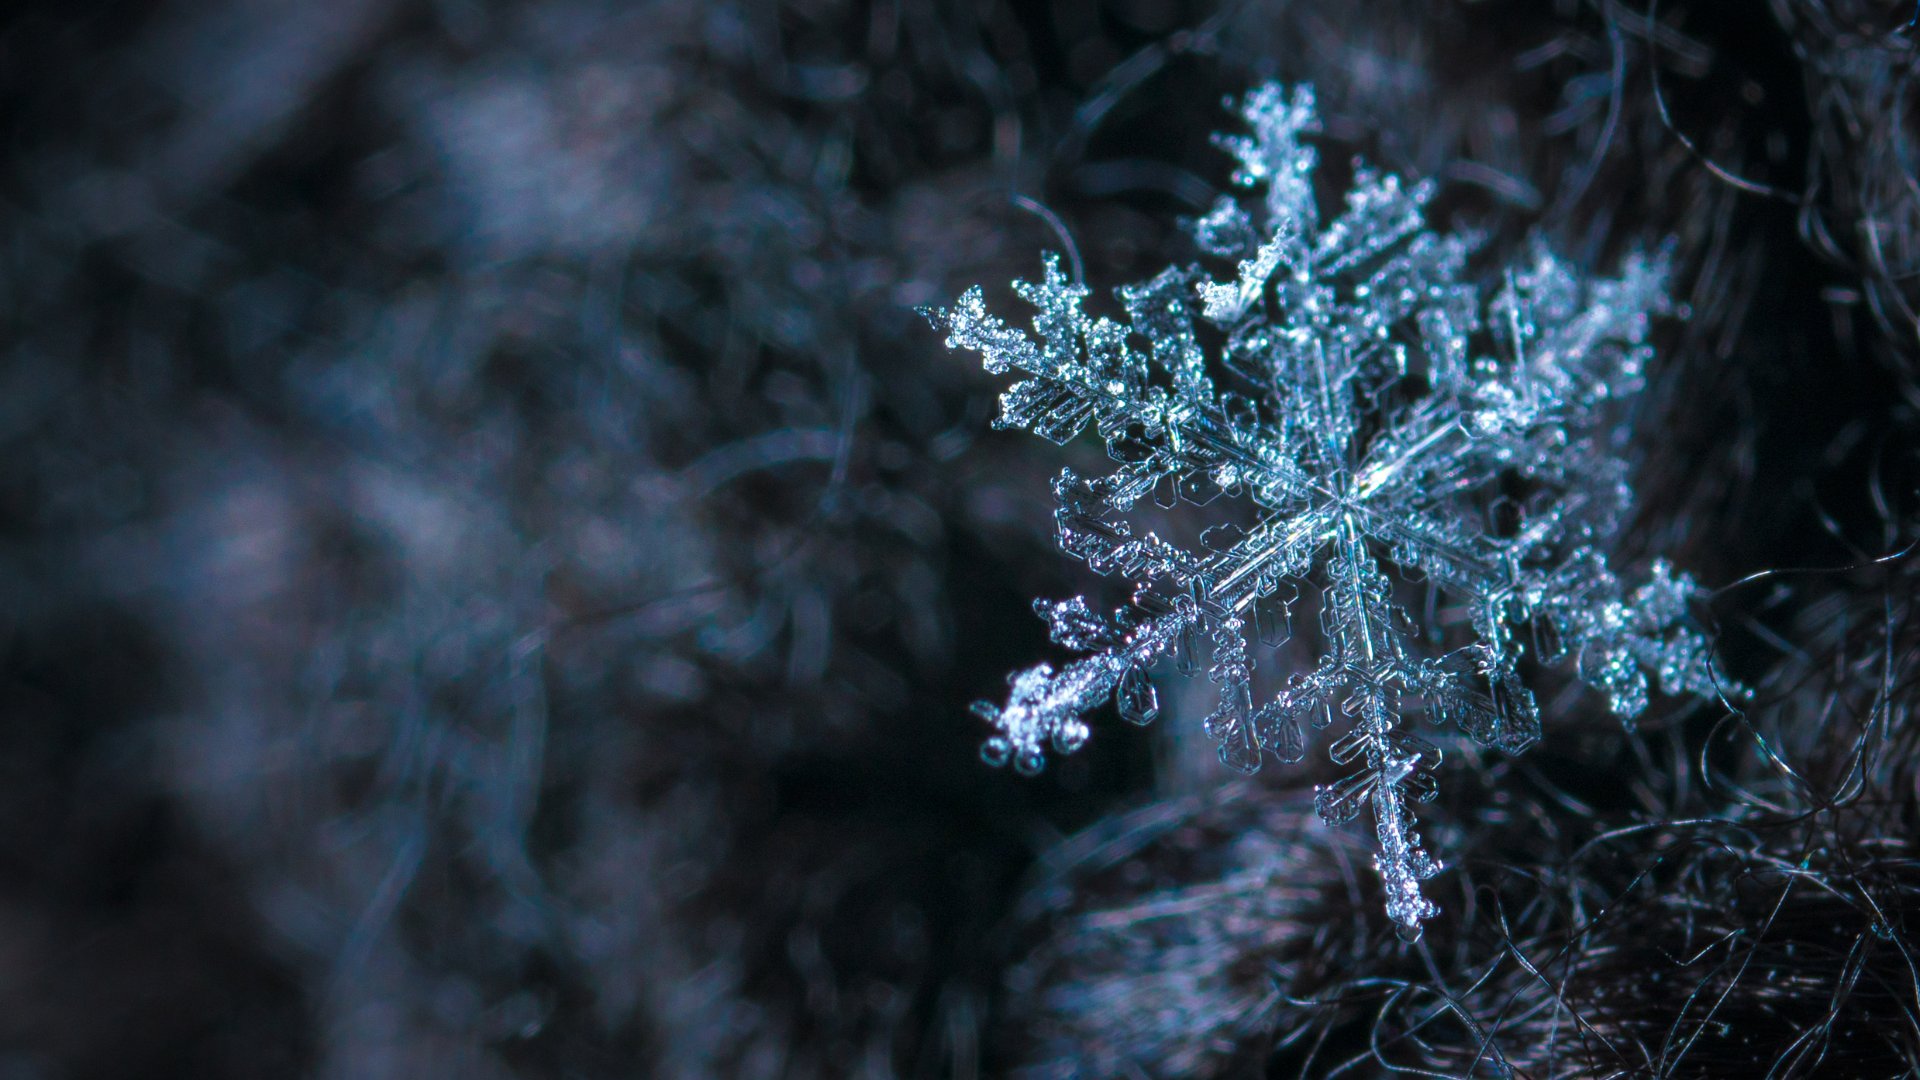 Snowflakes hold clues about much larger weather systems